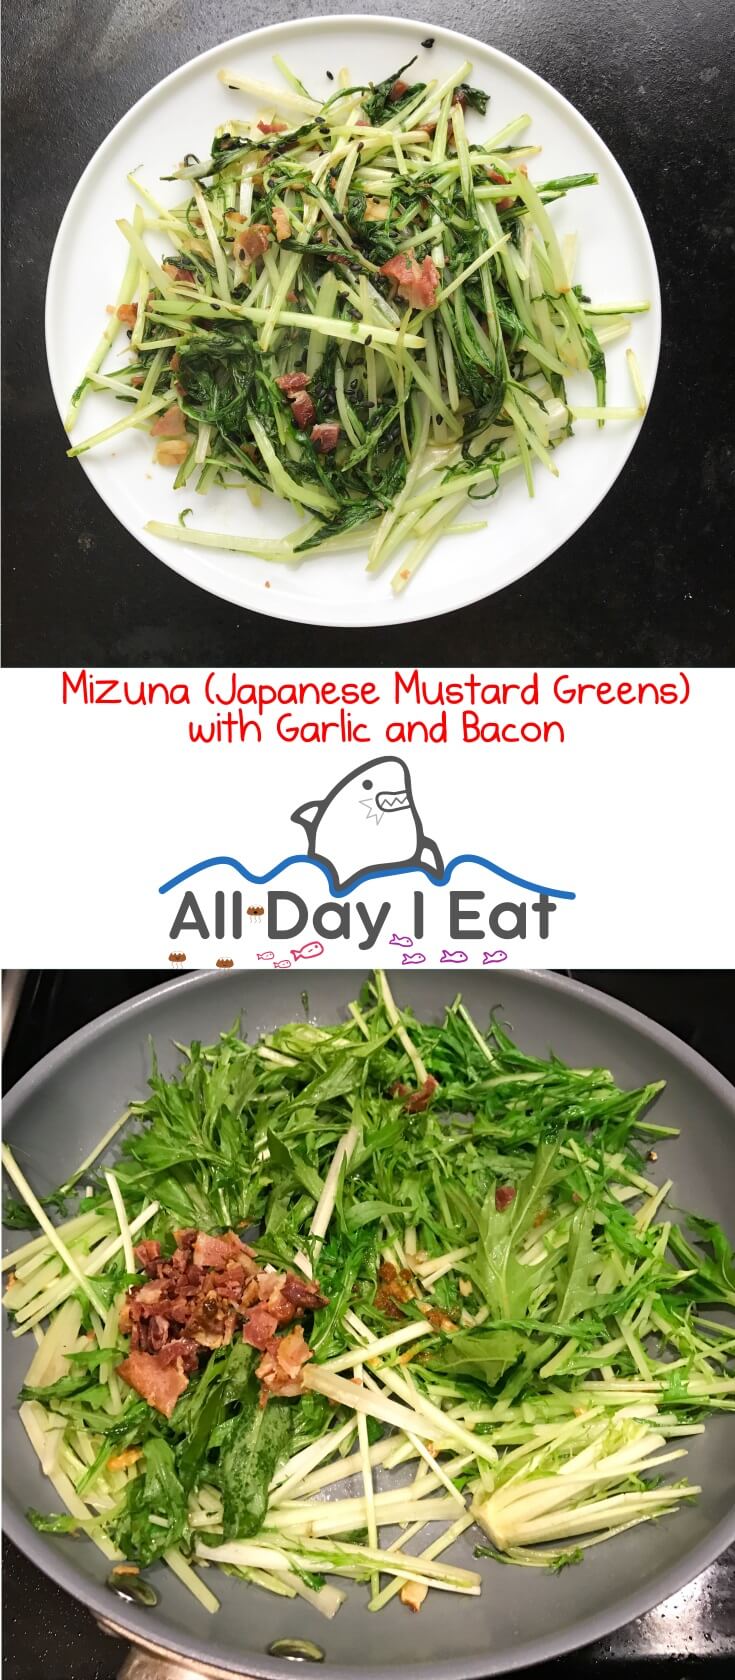 Mizuna (Japanese Mustard Greens) with Garlic and Bacon. A tasty way to get some more vegetables into your diet. | www.alldayieat.com